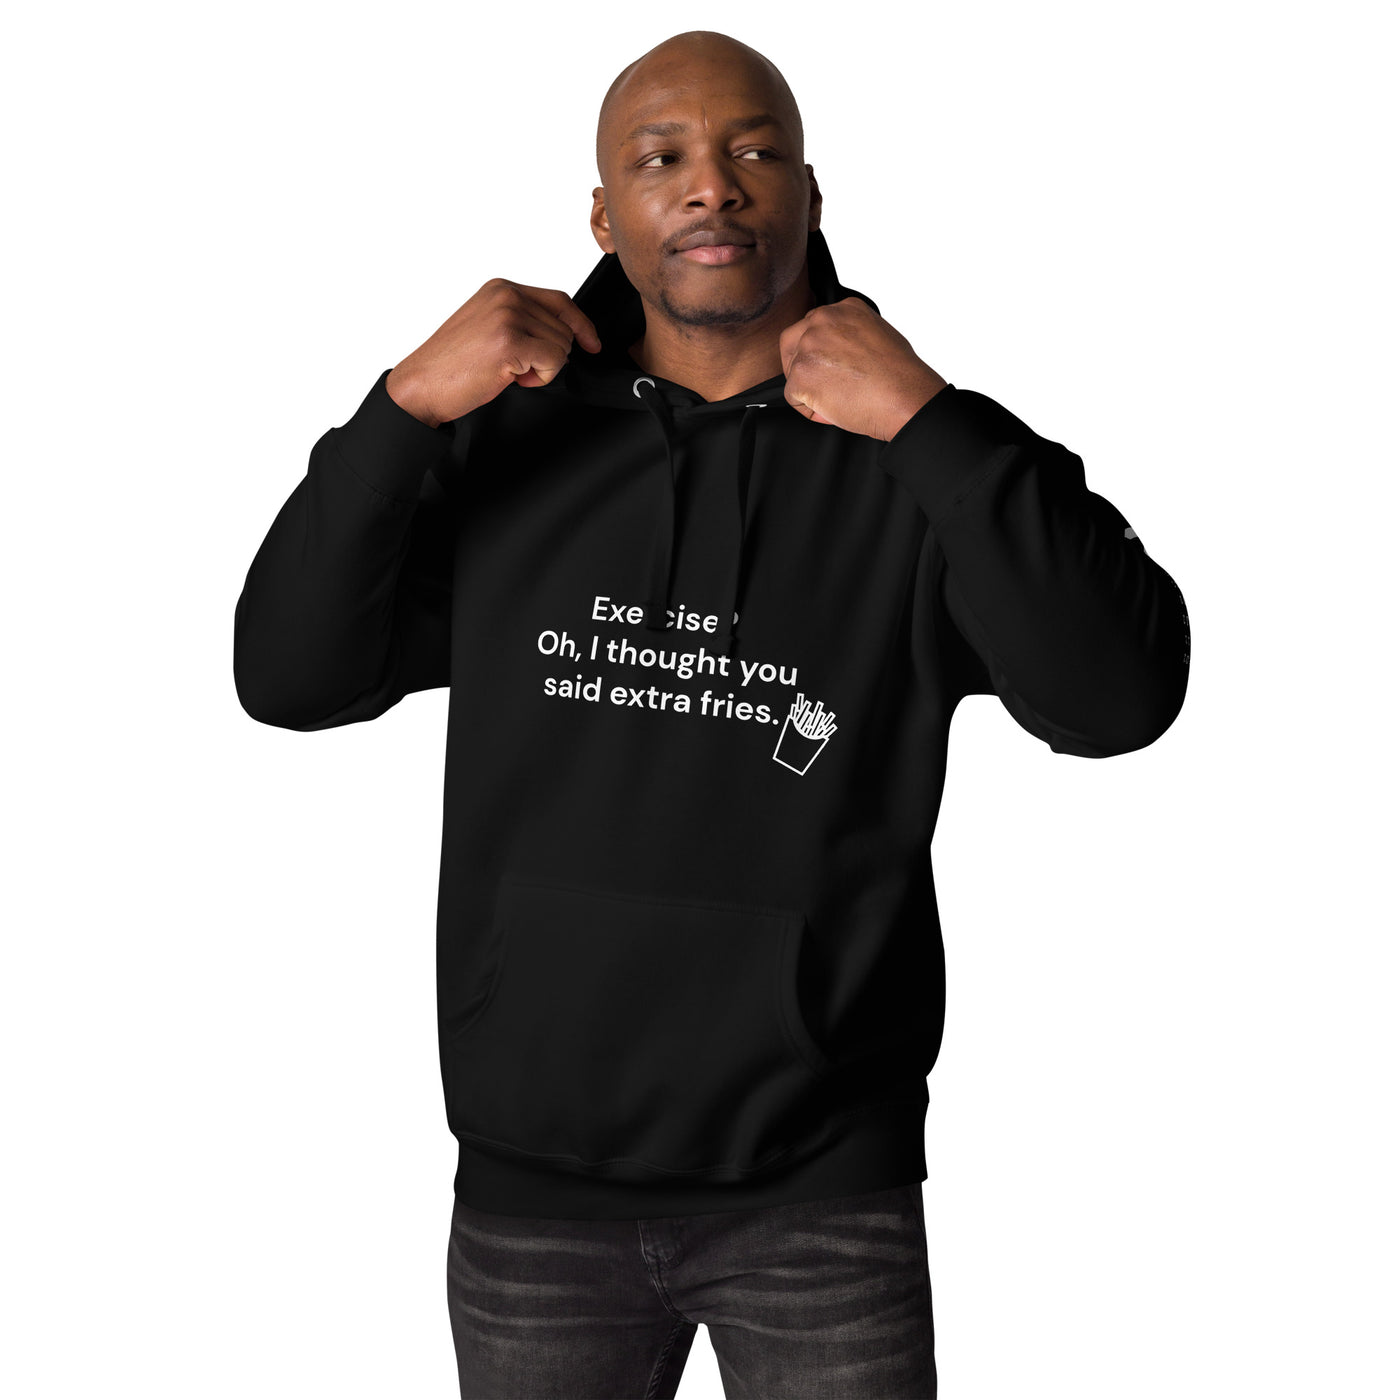 Exercise? Oh, I thought you said extra fries - Unisex Hoodie